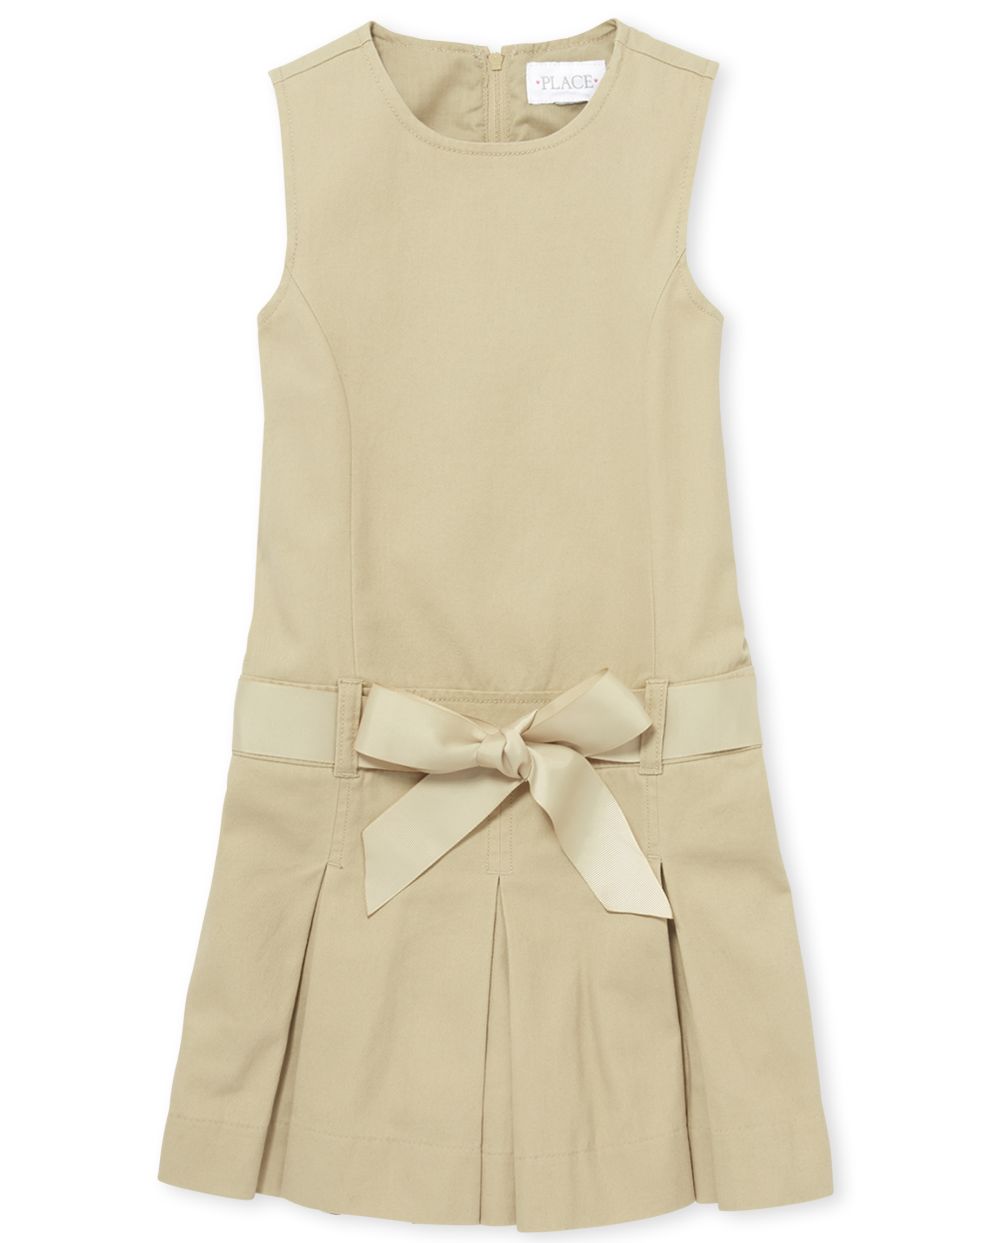 Girls Above the Knee Pleated Self Tie Belted Sleeveless Jumper With a Ribbon